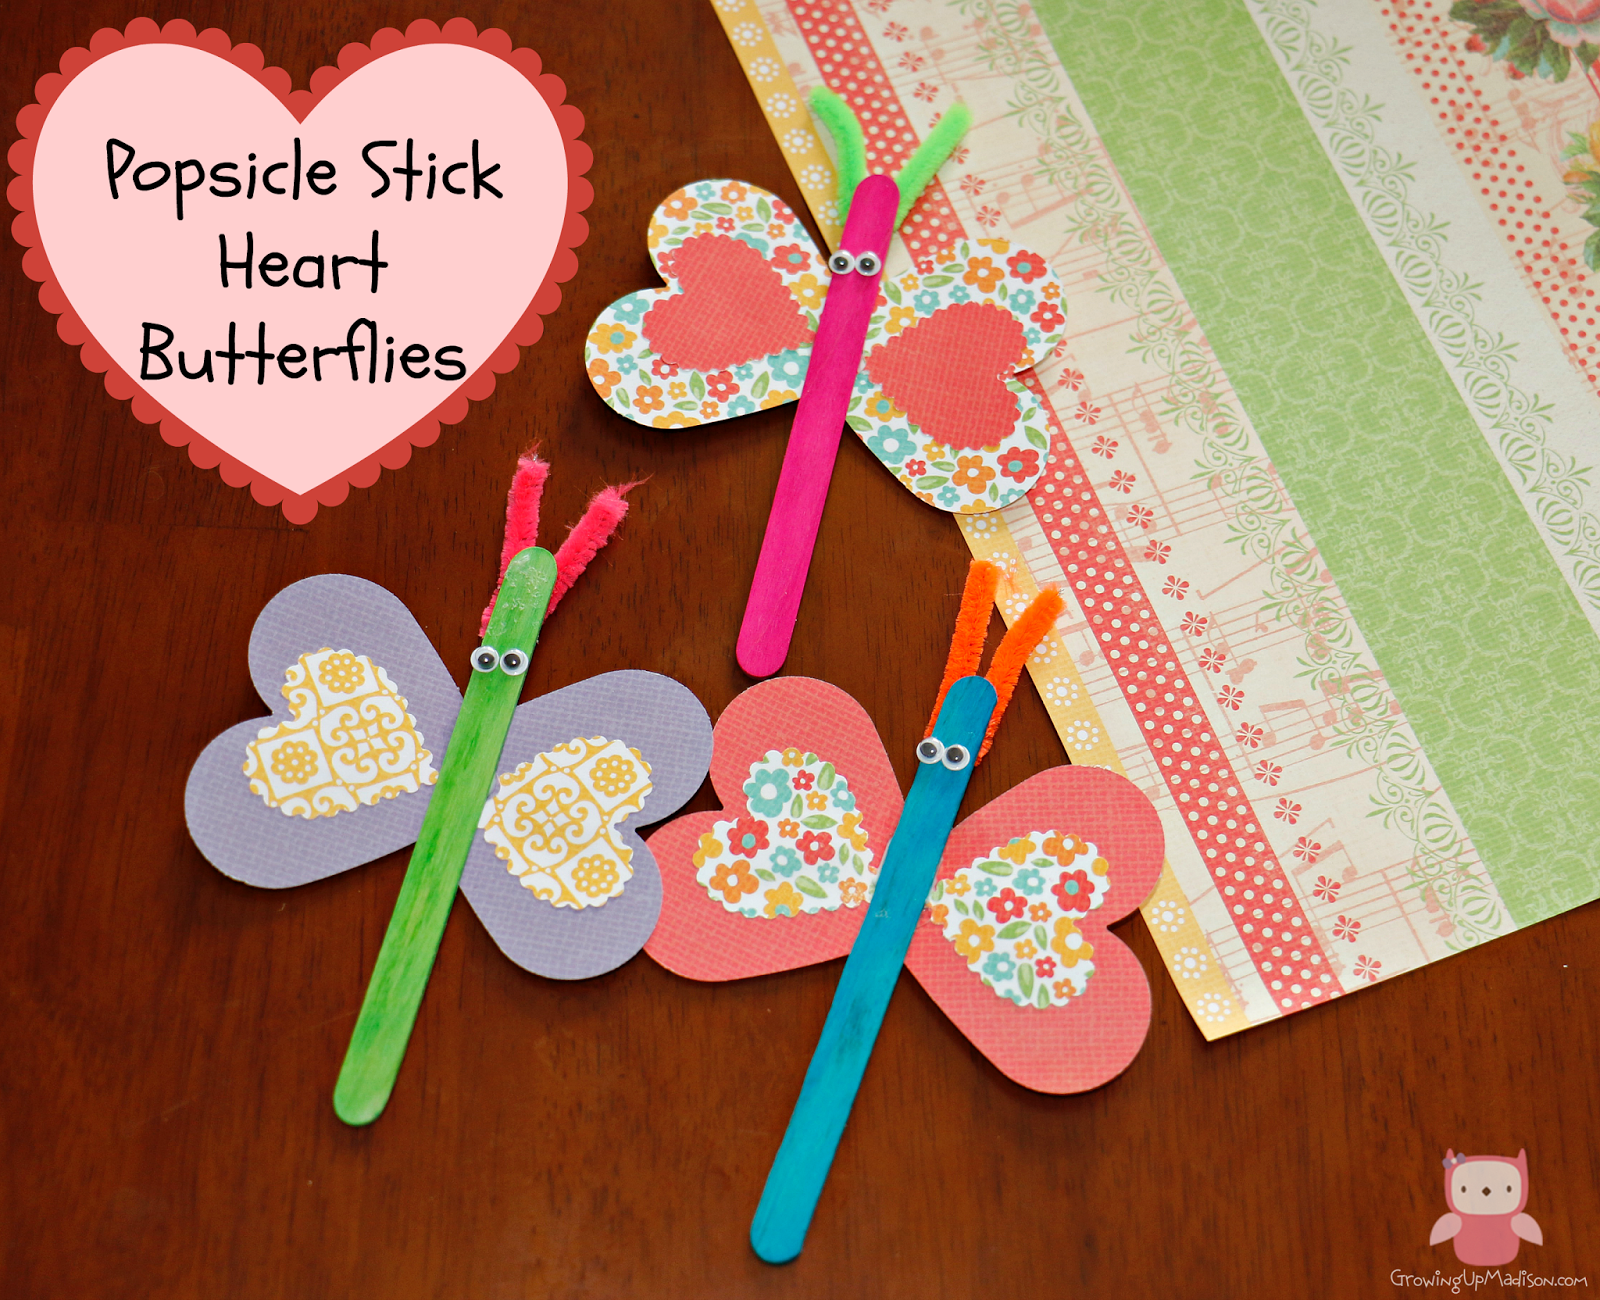 Popsicle Stick Heart Butterflies - An Easy Valentine's Day Craft for